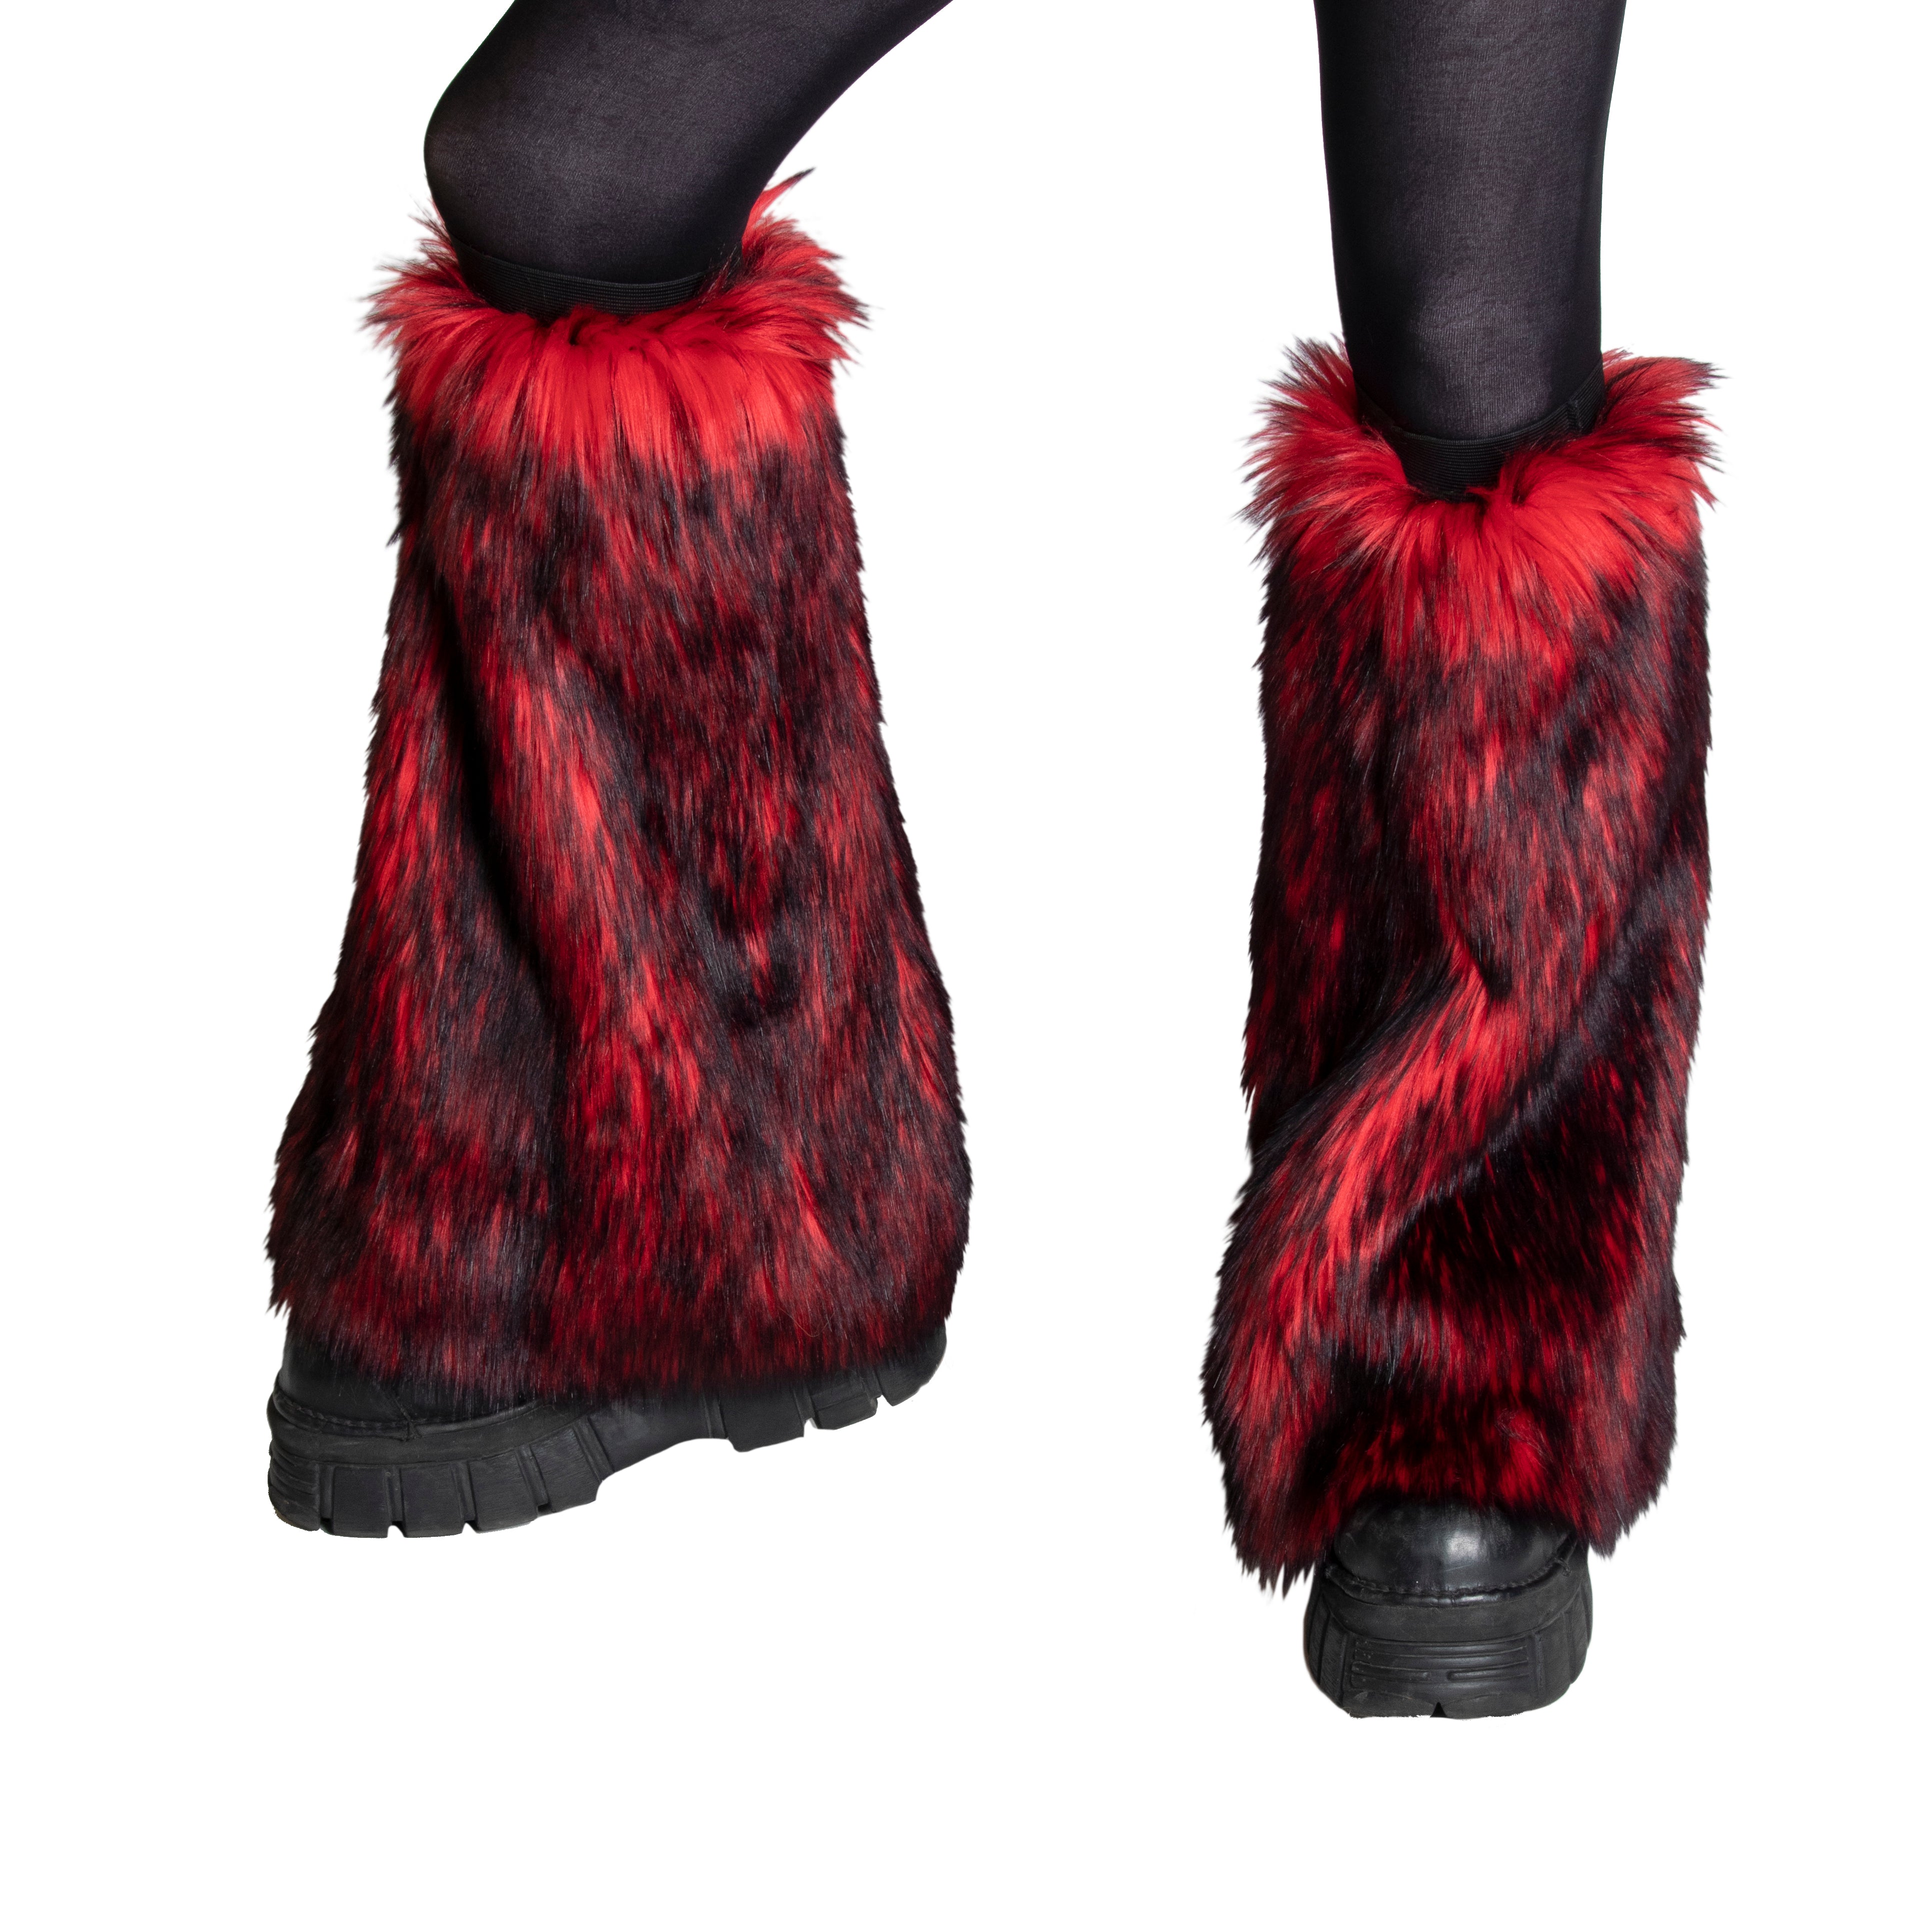 red Pawstar fluffy leg warmers for danceers, ravers, furries and music festival goers. 